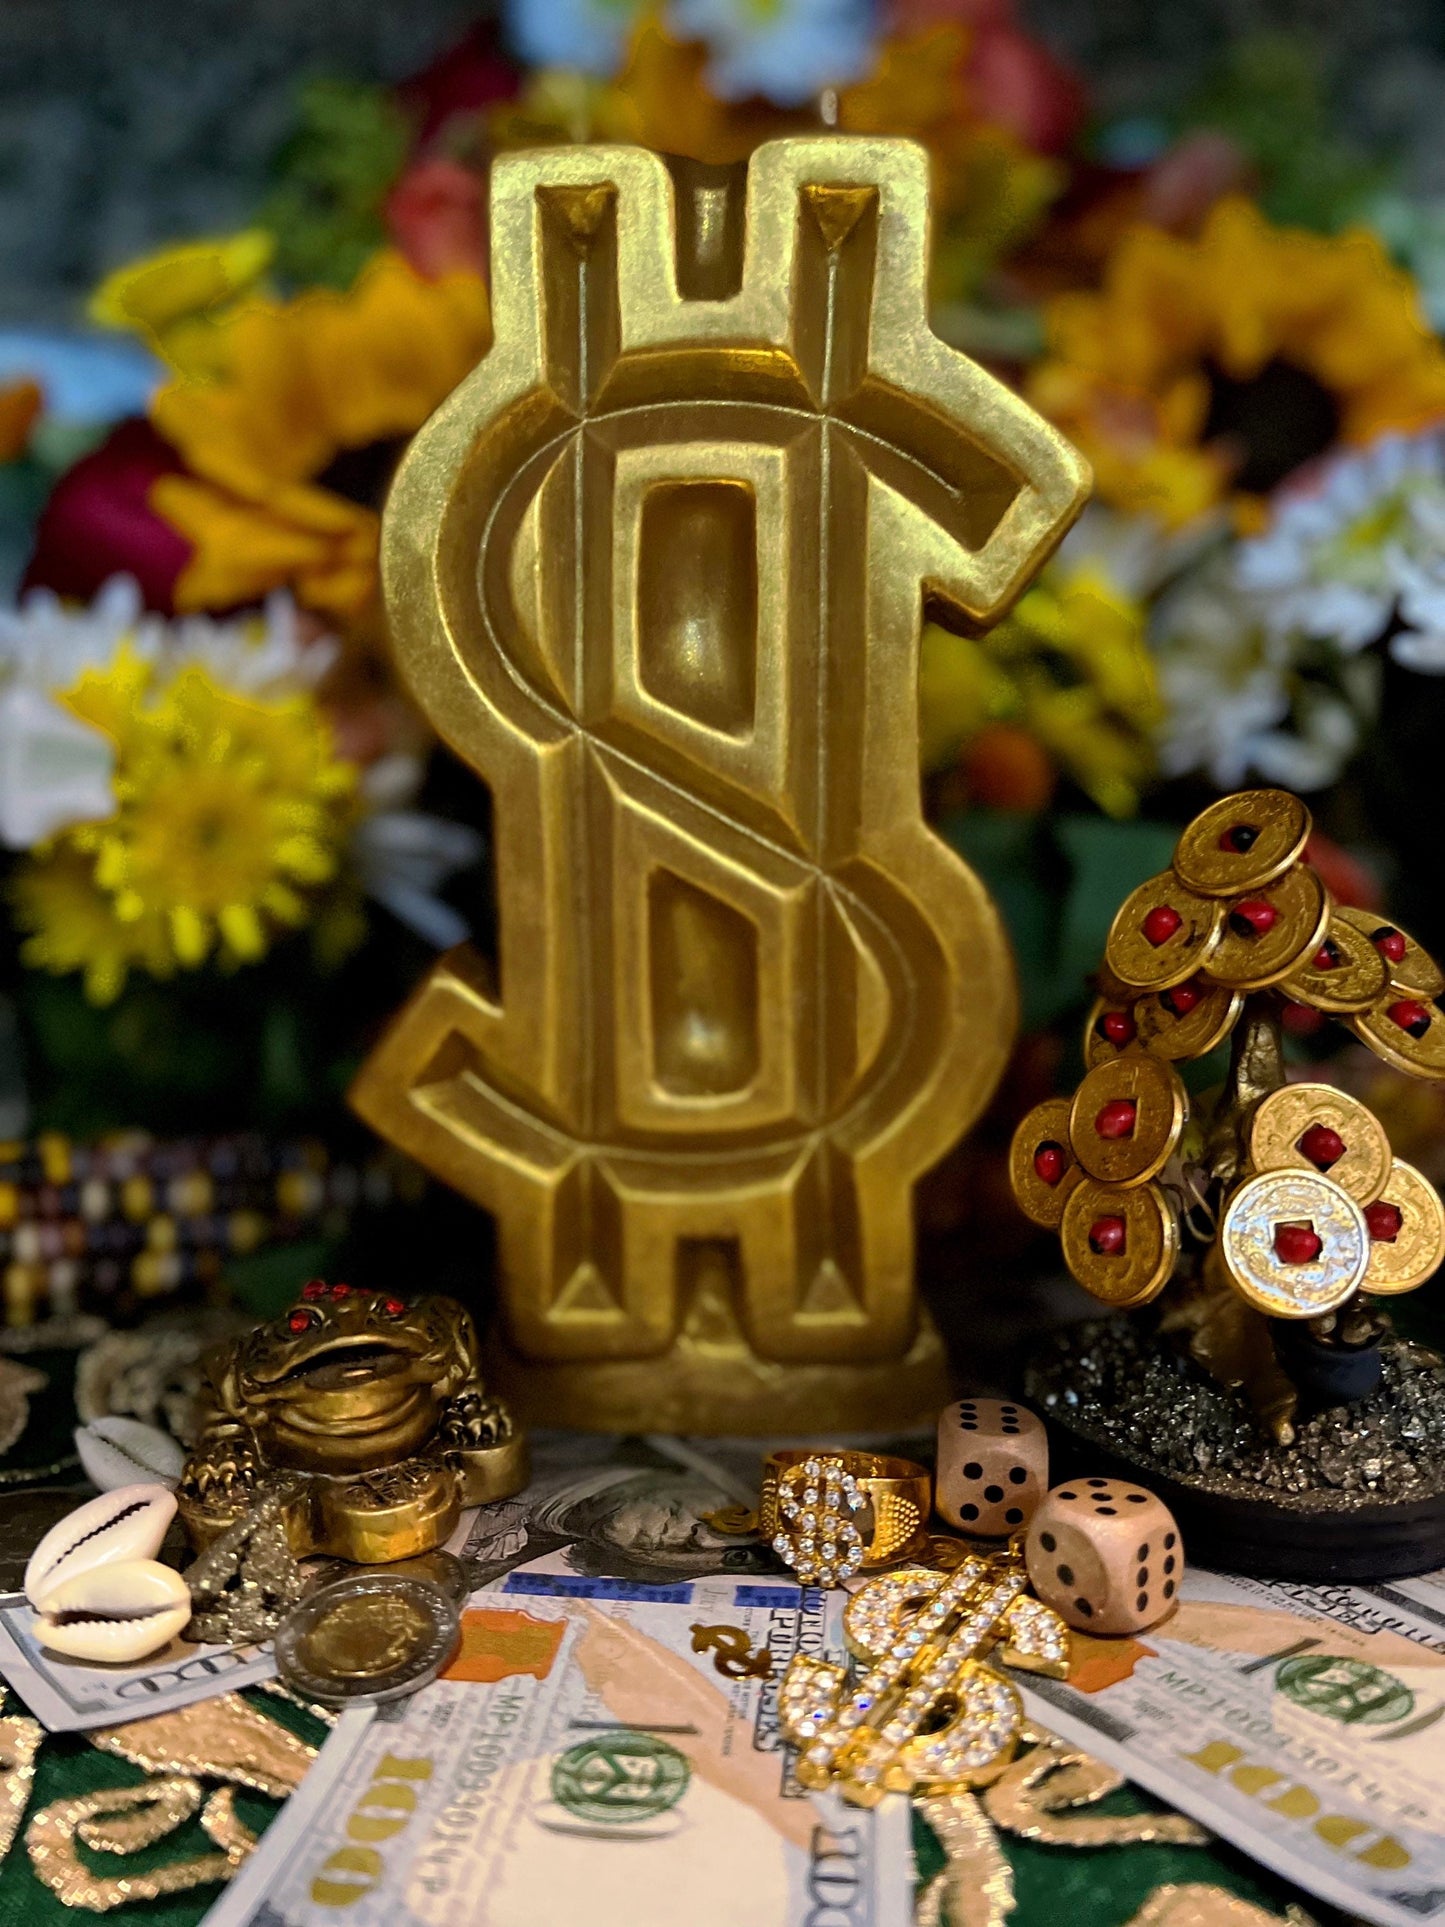 Big Dollar Sign Candle + Money Drawing + 8”